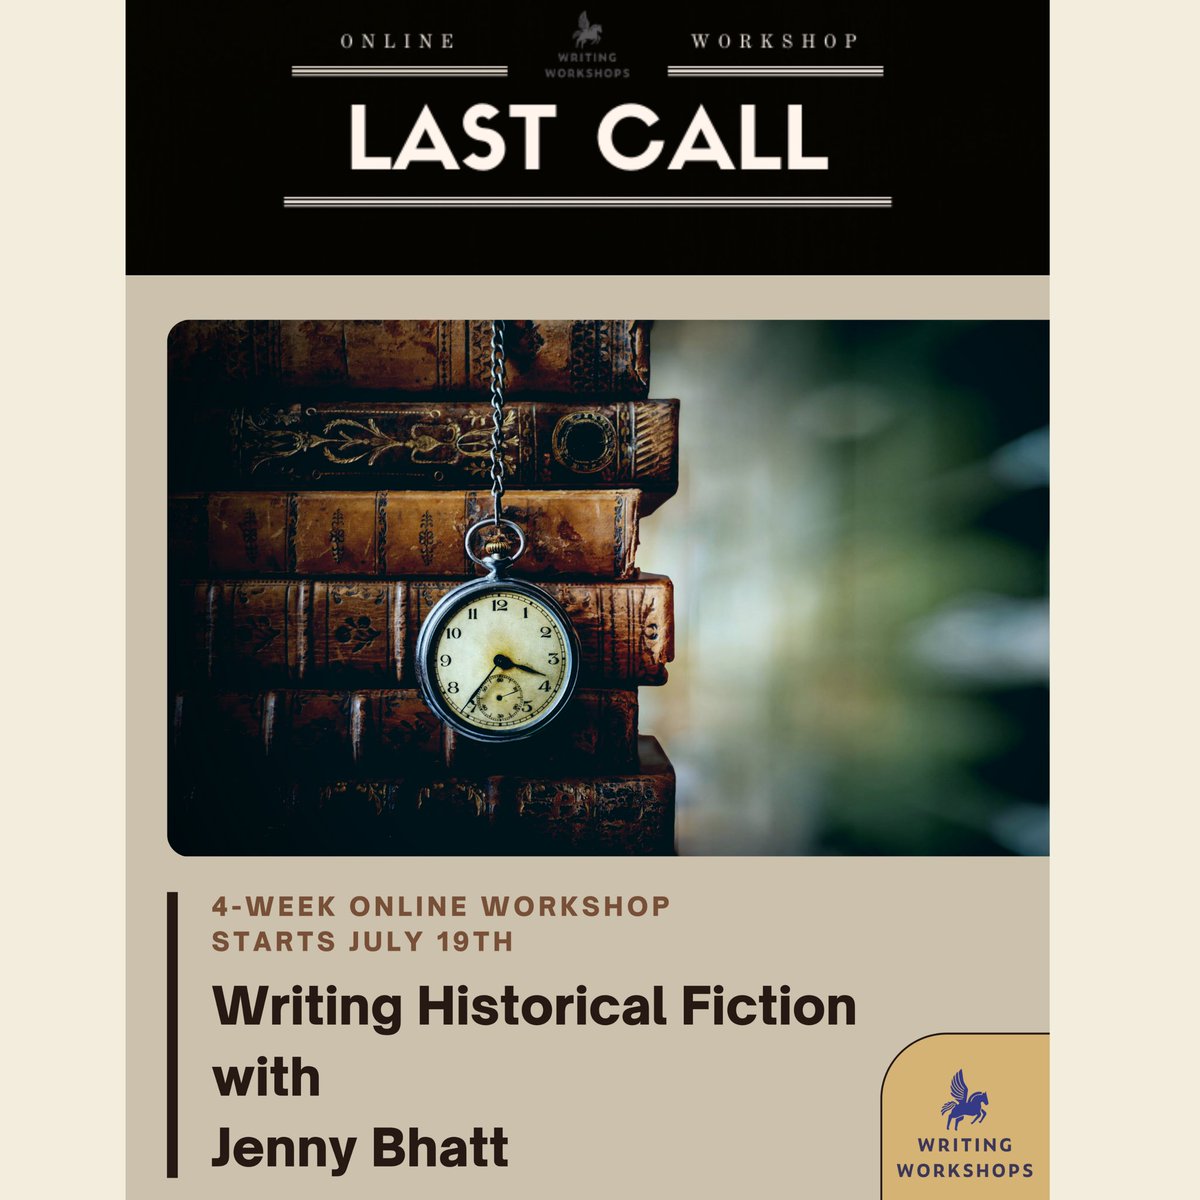 STARTS TODAY (7/19): Writing Historical Fiction 4-Week Online Workshop with Jenny Bhatt. Join us: 

https://t.co/p8f04m0NJL https://t.co/ea0NM4Dw2A